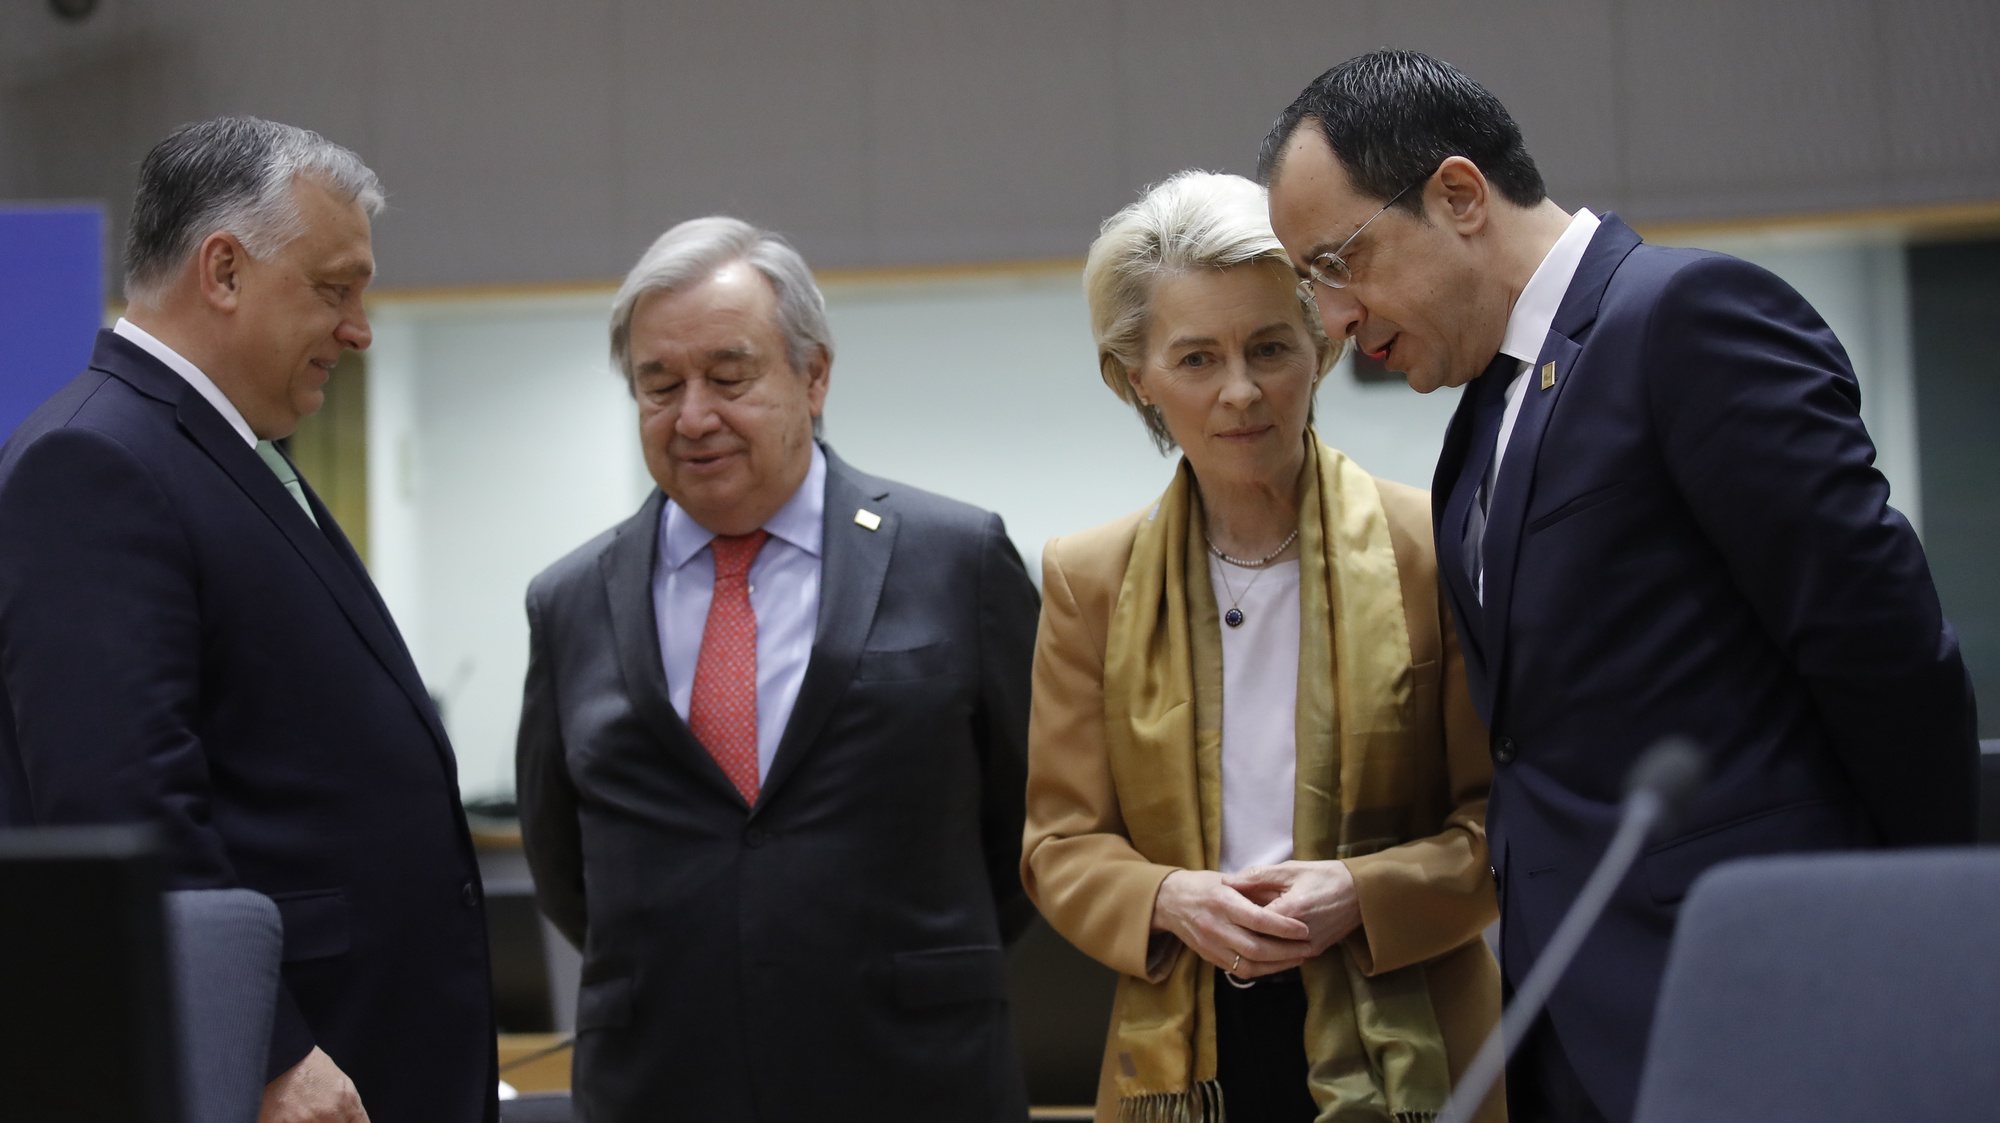 epa10538395 (L-R) Hungarian Prime Minister Viktor Orban, United Nations (UN) Secretary-General Antonio Guterres, European Commission President Ursula von der Leyen and Cyprus&#039; President Nikos Christodoulides attend an EU Summit in Brussels, Belgium, 23 March 2023. EU leaders will meet for a two-day summit in Brussels to discuss the latest developments in relation to &#039;Russia&#039;s war of aggression against Ukraine&#039; and continued EU support for Ukraine and its people. The leaders will also debate on competitiveness, single market and the economy, energy, external relations among other topics, including migration.  EPA/OLIVIER HOSLET